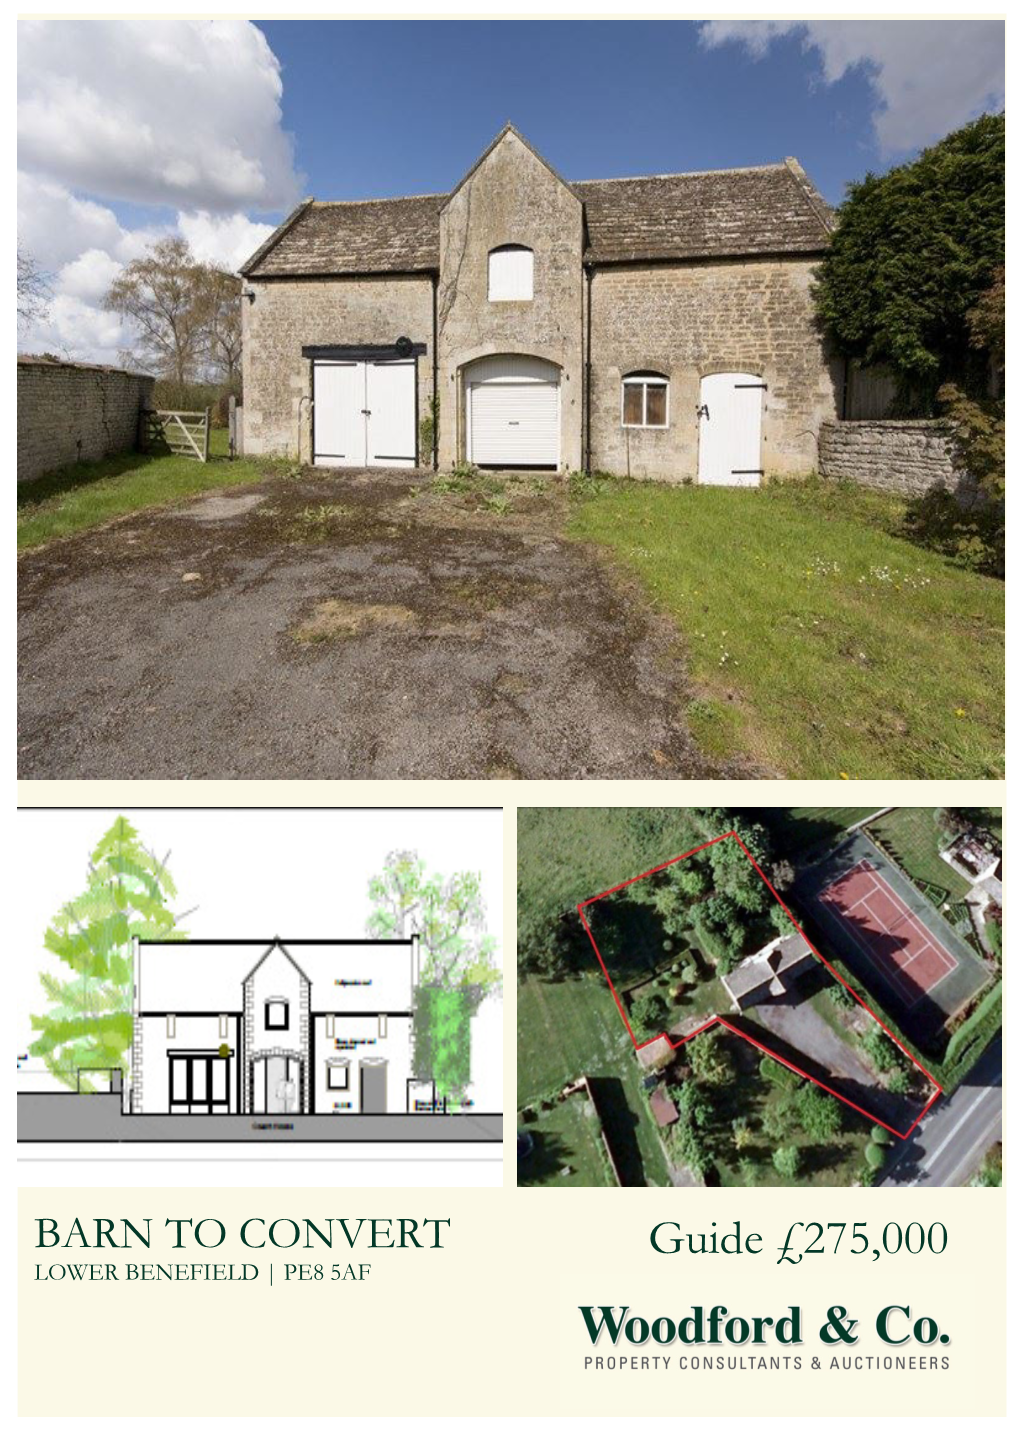 Guide £275,000 LOWER BENEFIELD | PE8 5AF